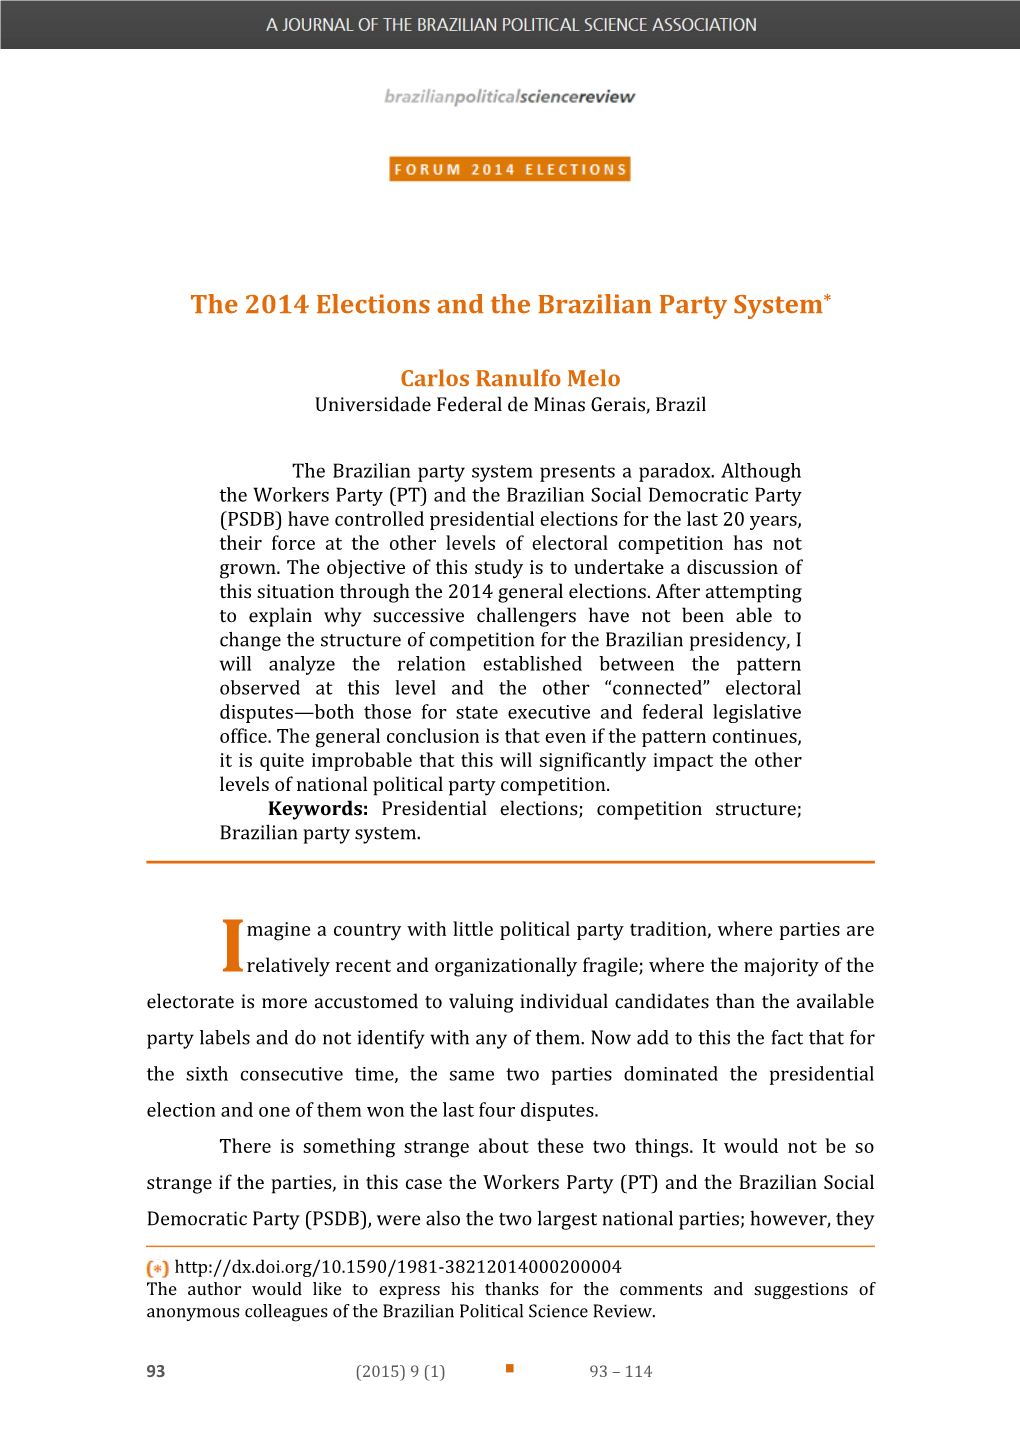 The 2014 Elections and the Brazilian Party System*